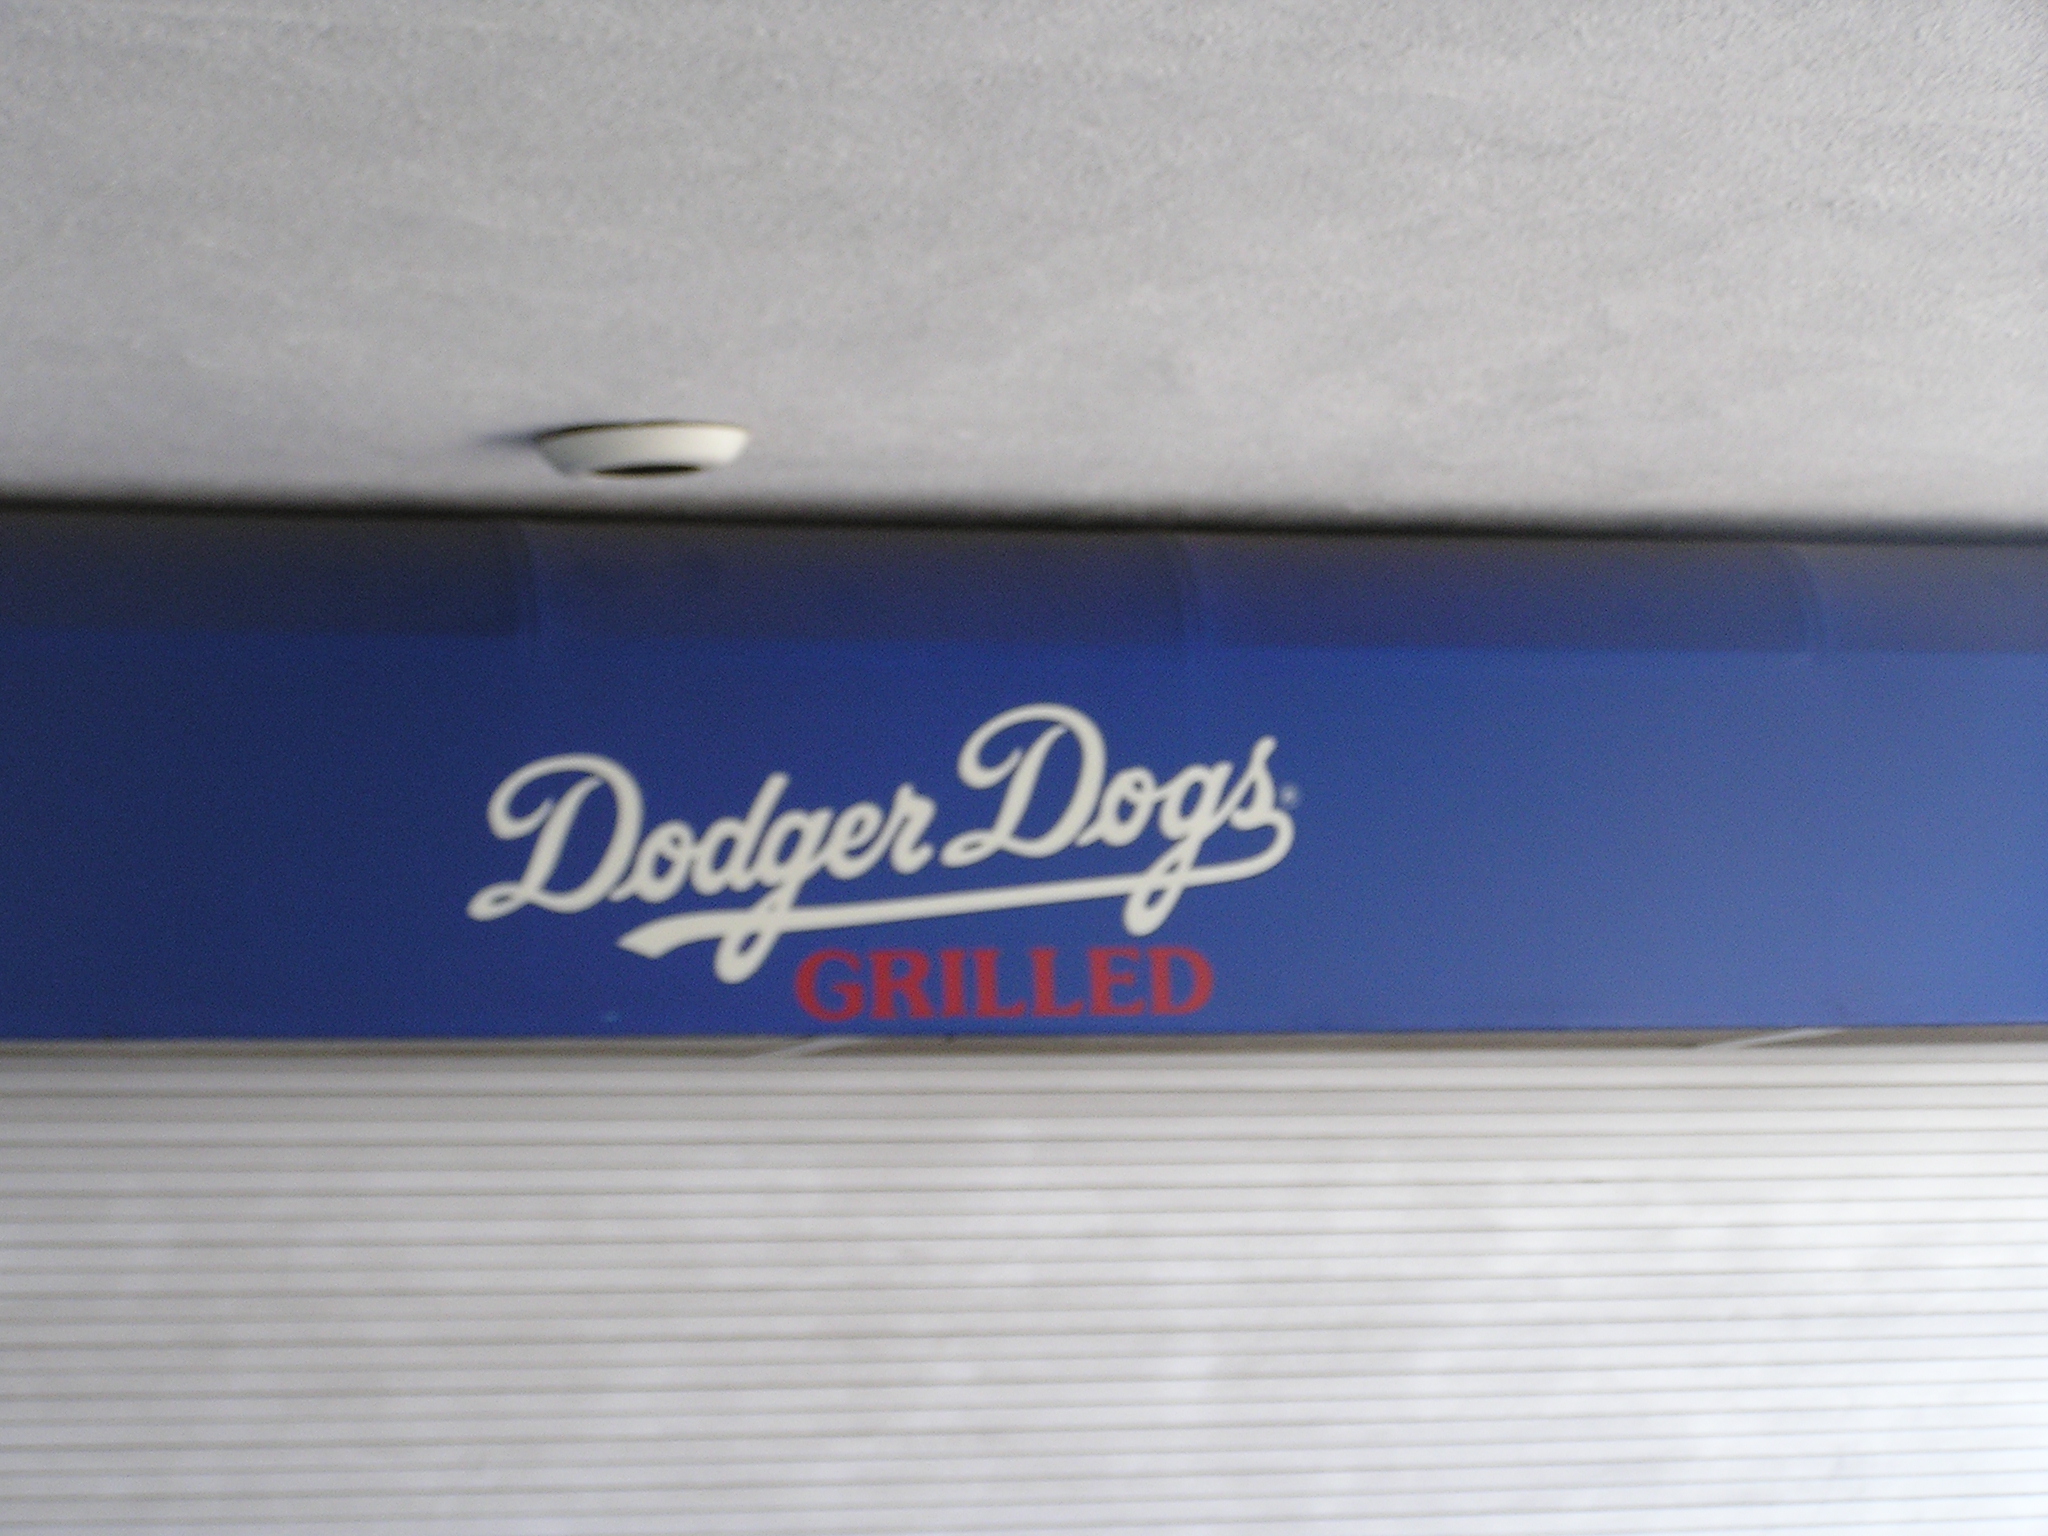 What to eat during the game - Dodger Stadium